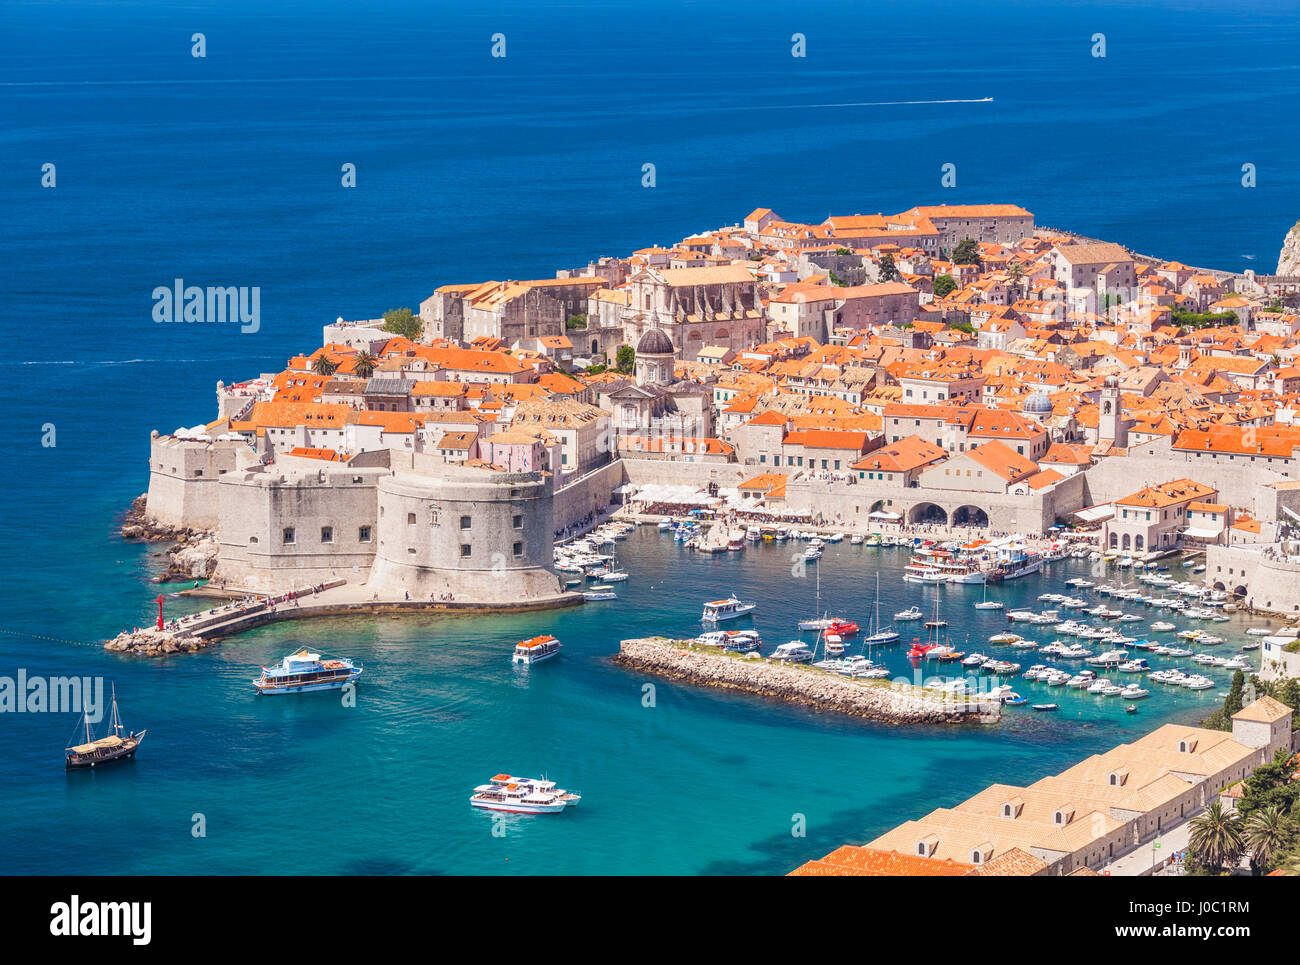 Aerial view of Old Port and Dubrovnik Old town, UNESCO World Heritage Site, Dubrovnik, Dalmatian Coast, Croatia Stock Photo